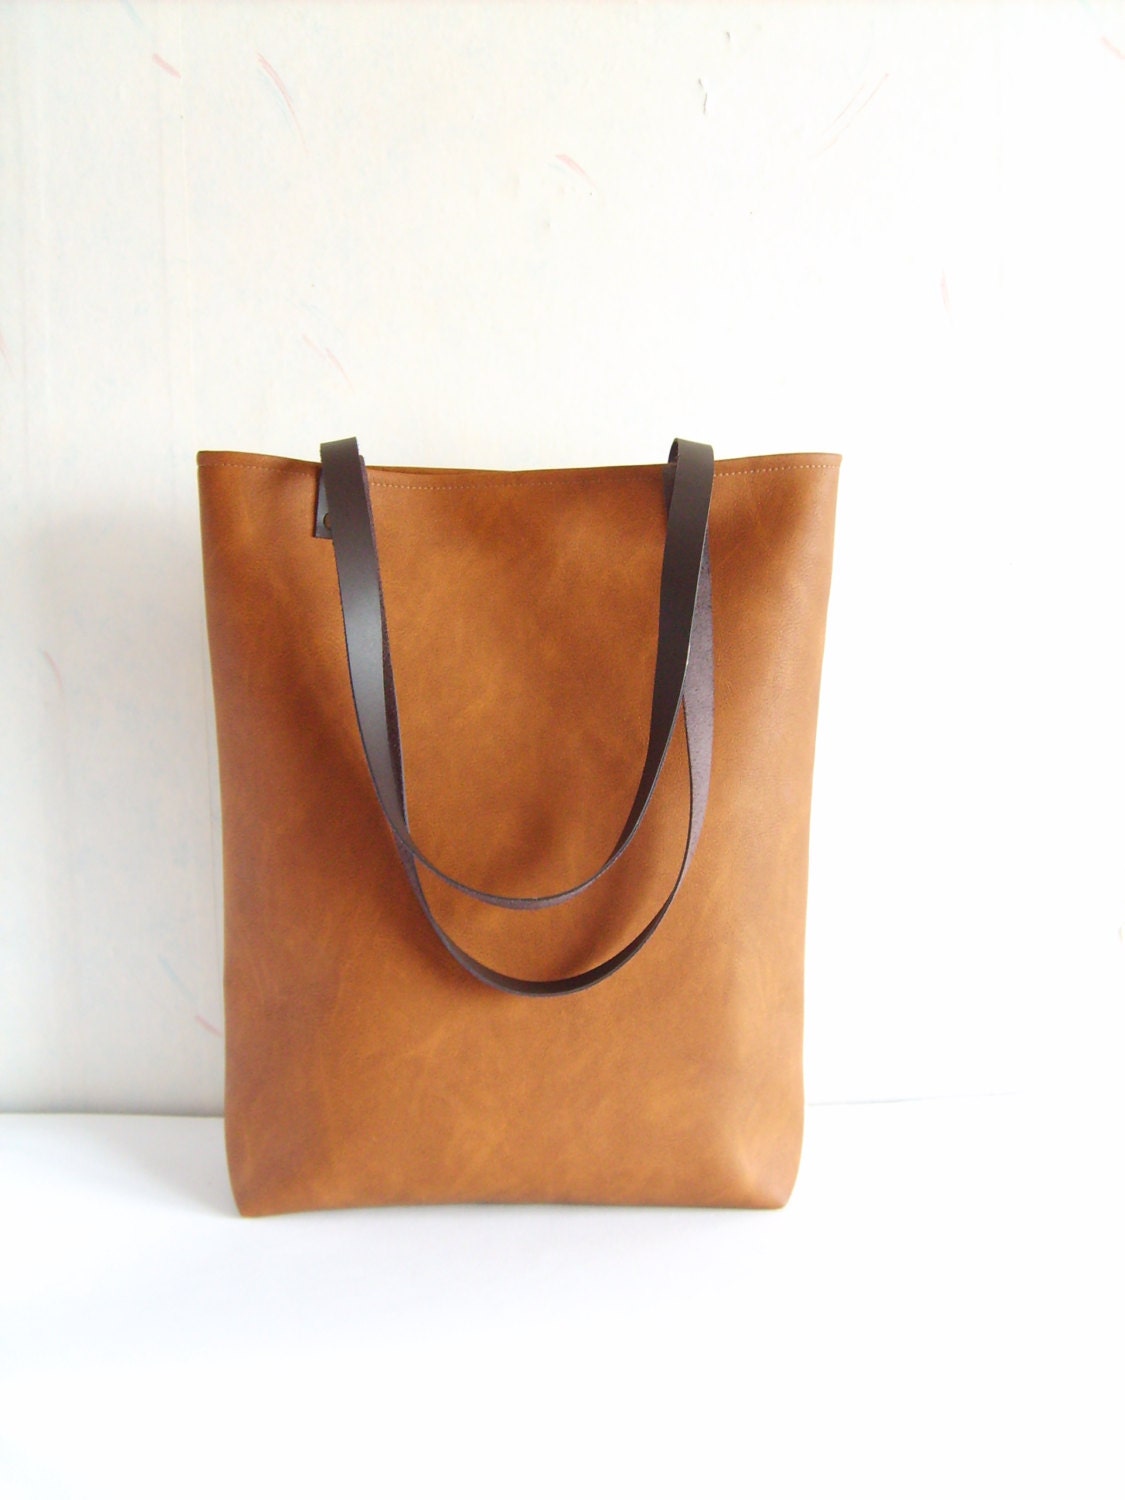 Large vegan leather cognac brown tote bag with real leather